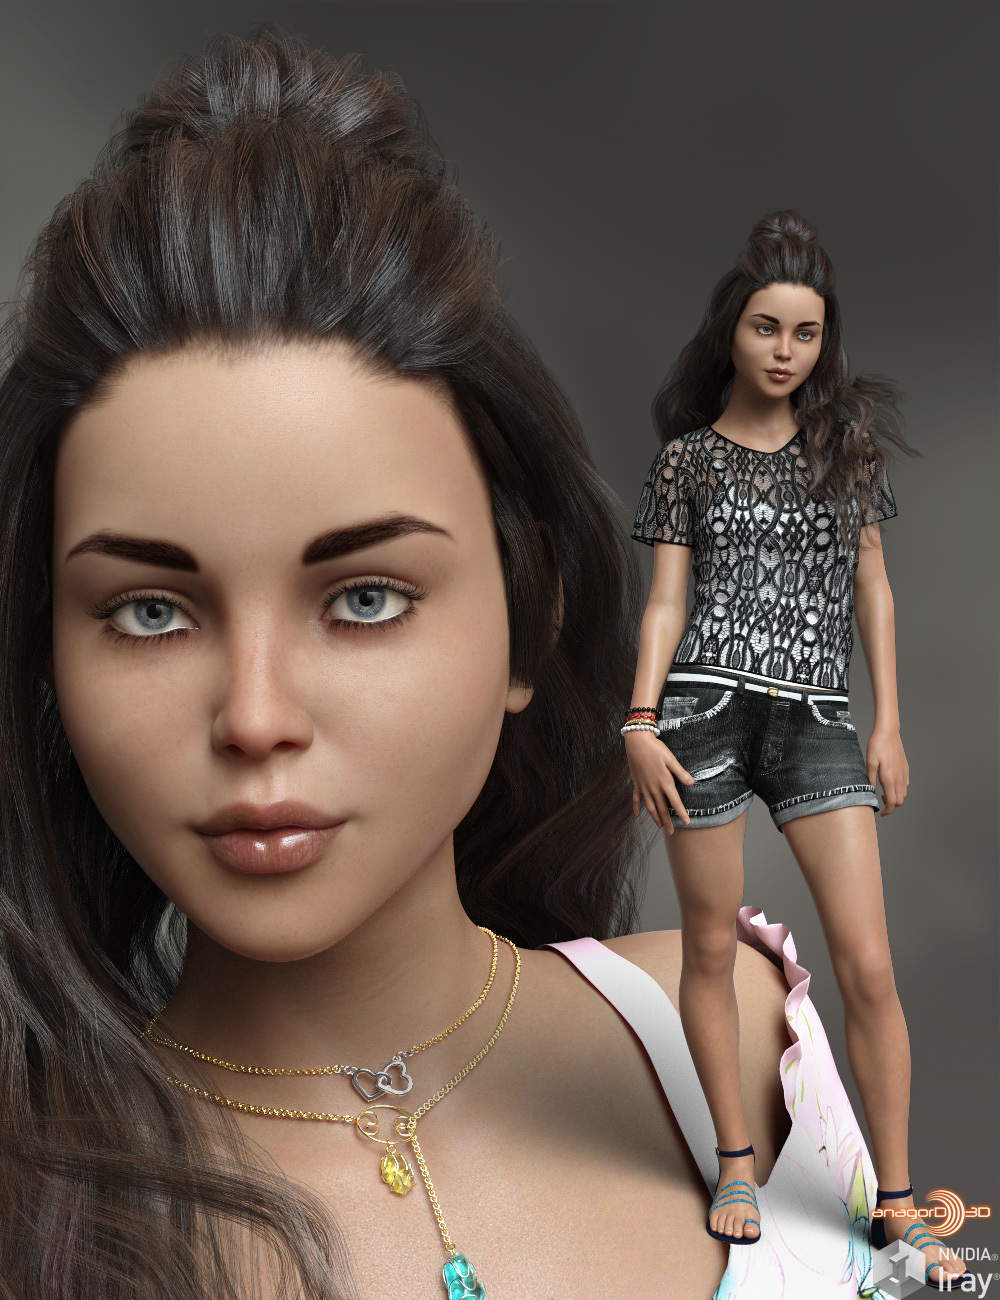 Anagord Teens G8F Vol 8 by: Anagord, 3D Models by Daz 3D